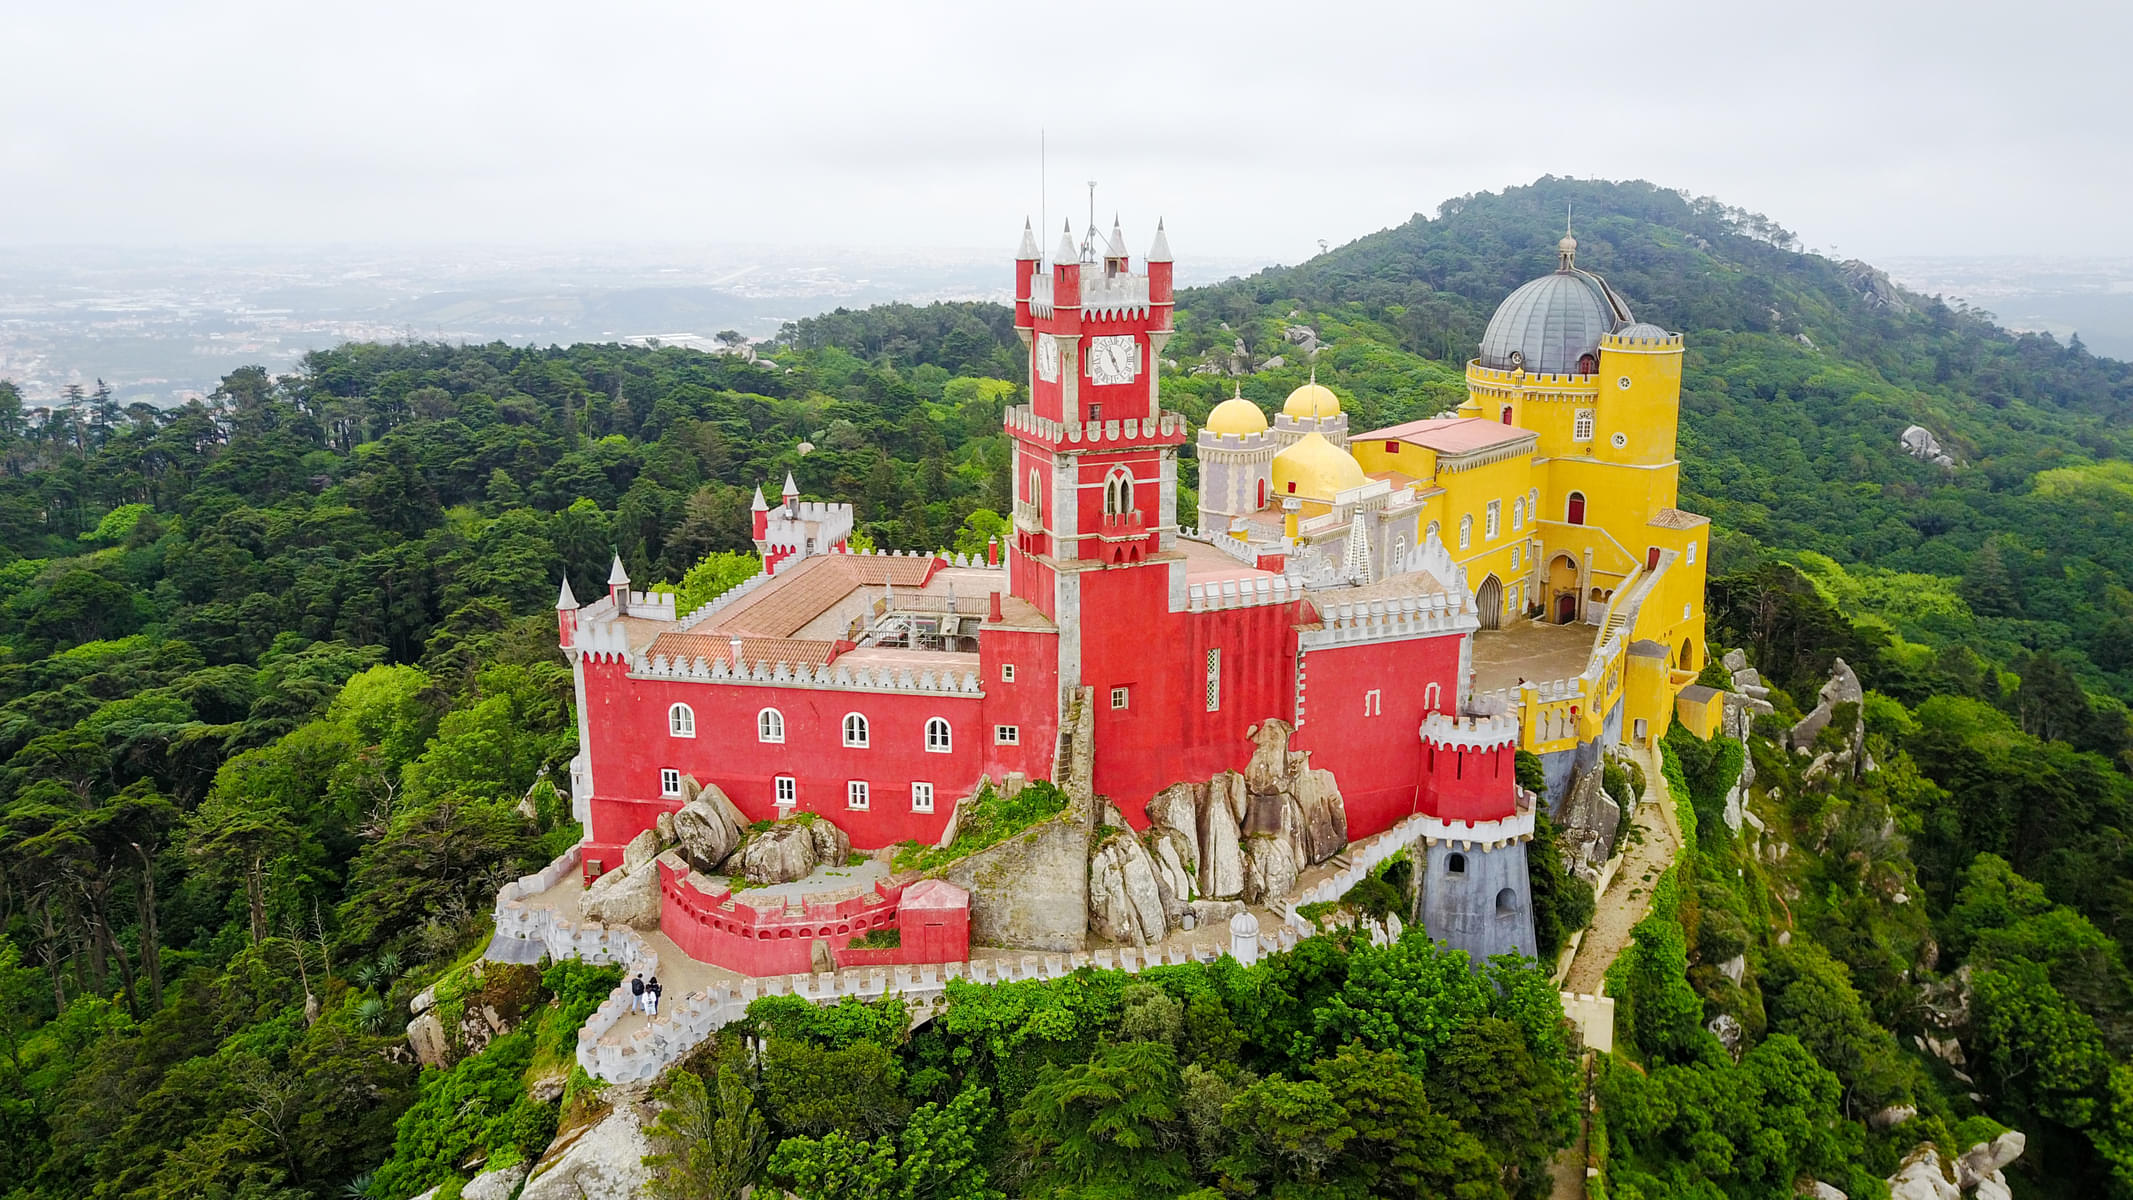 4.5-Hour Guided Tour of Sintra with Entry to Pena Palace